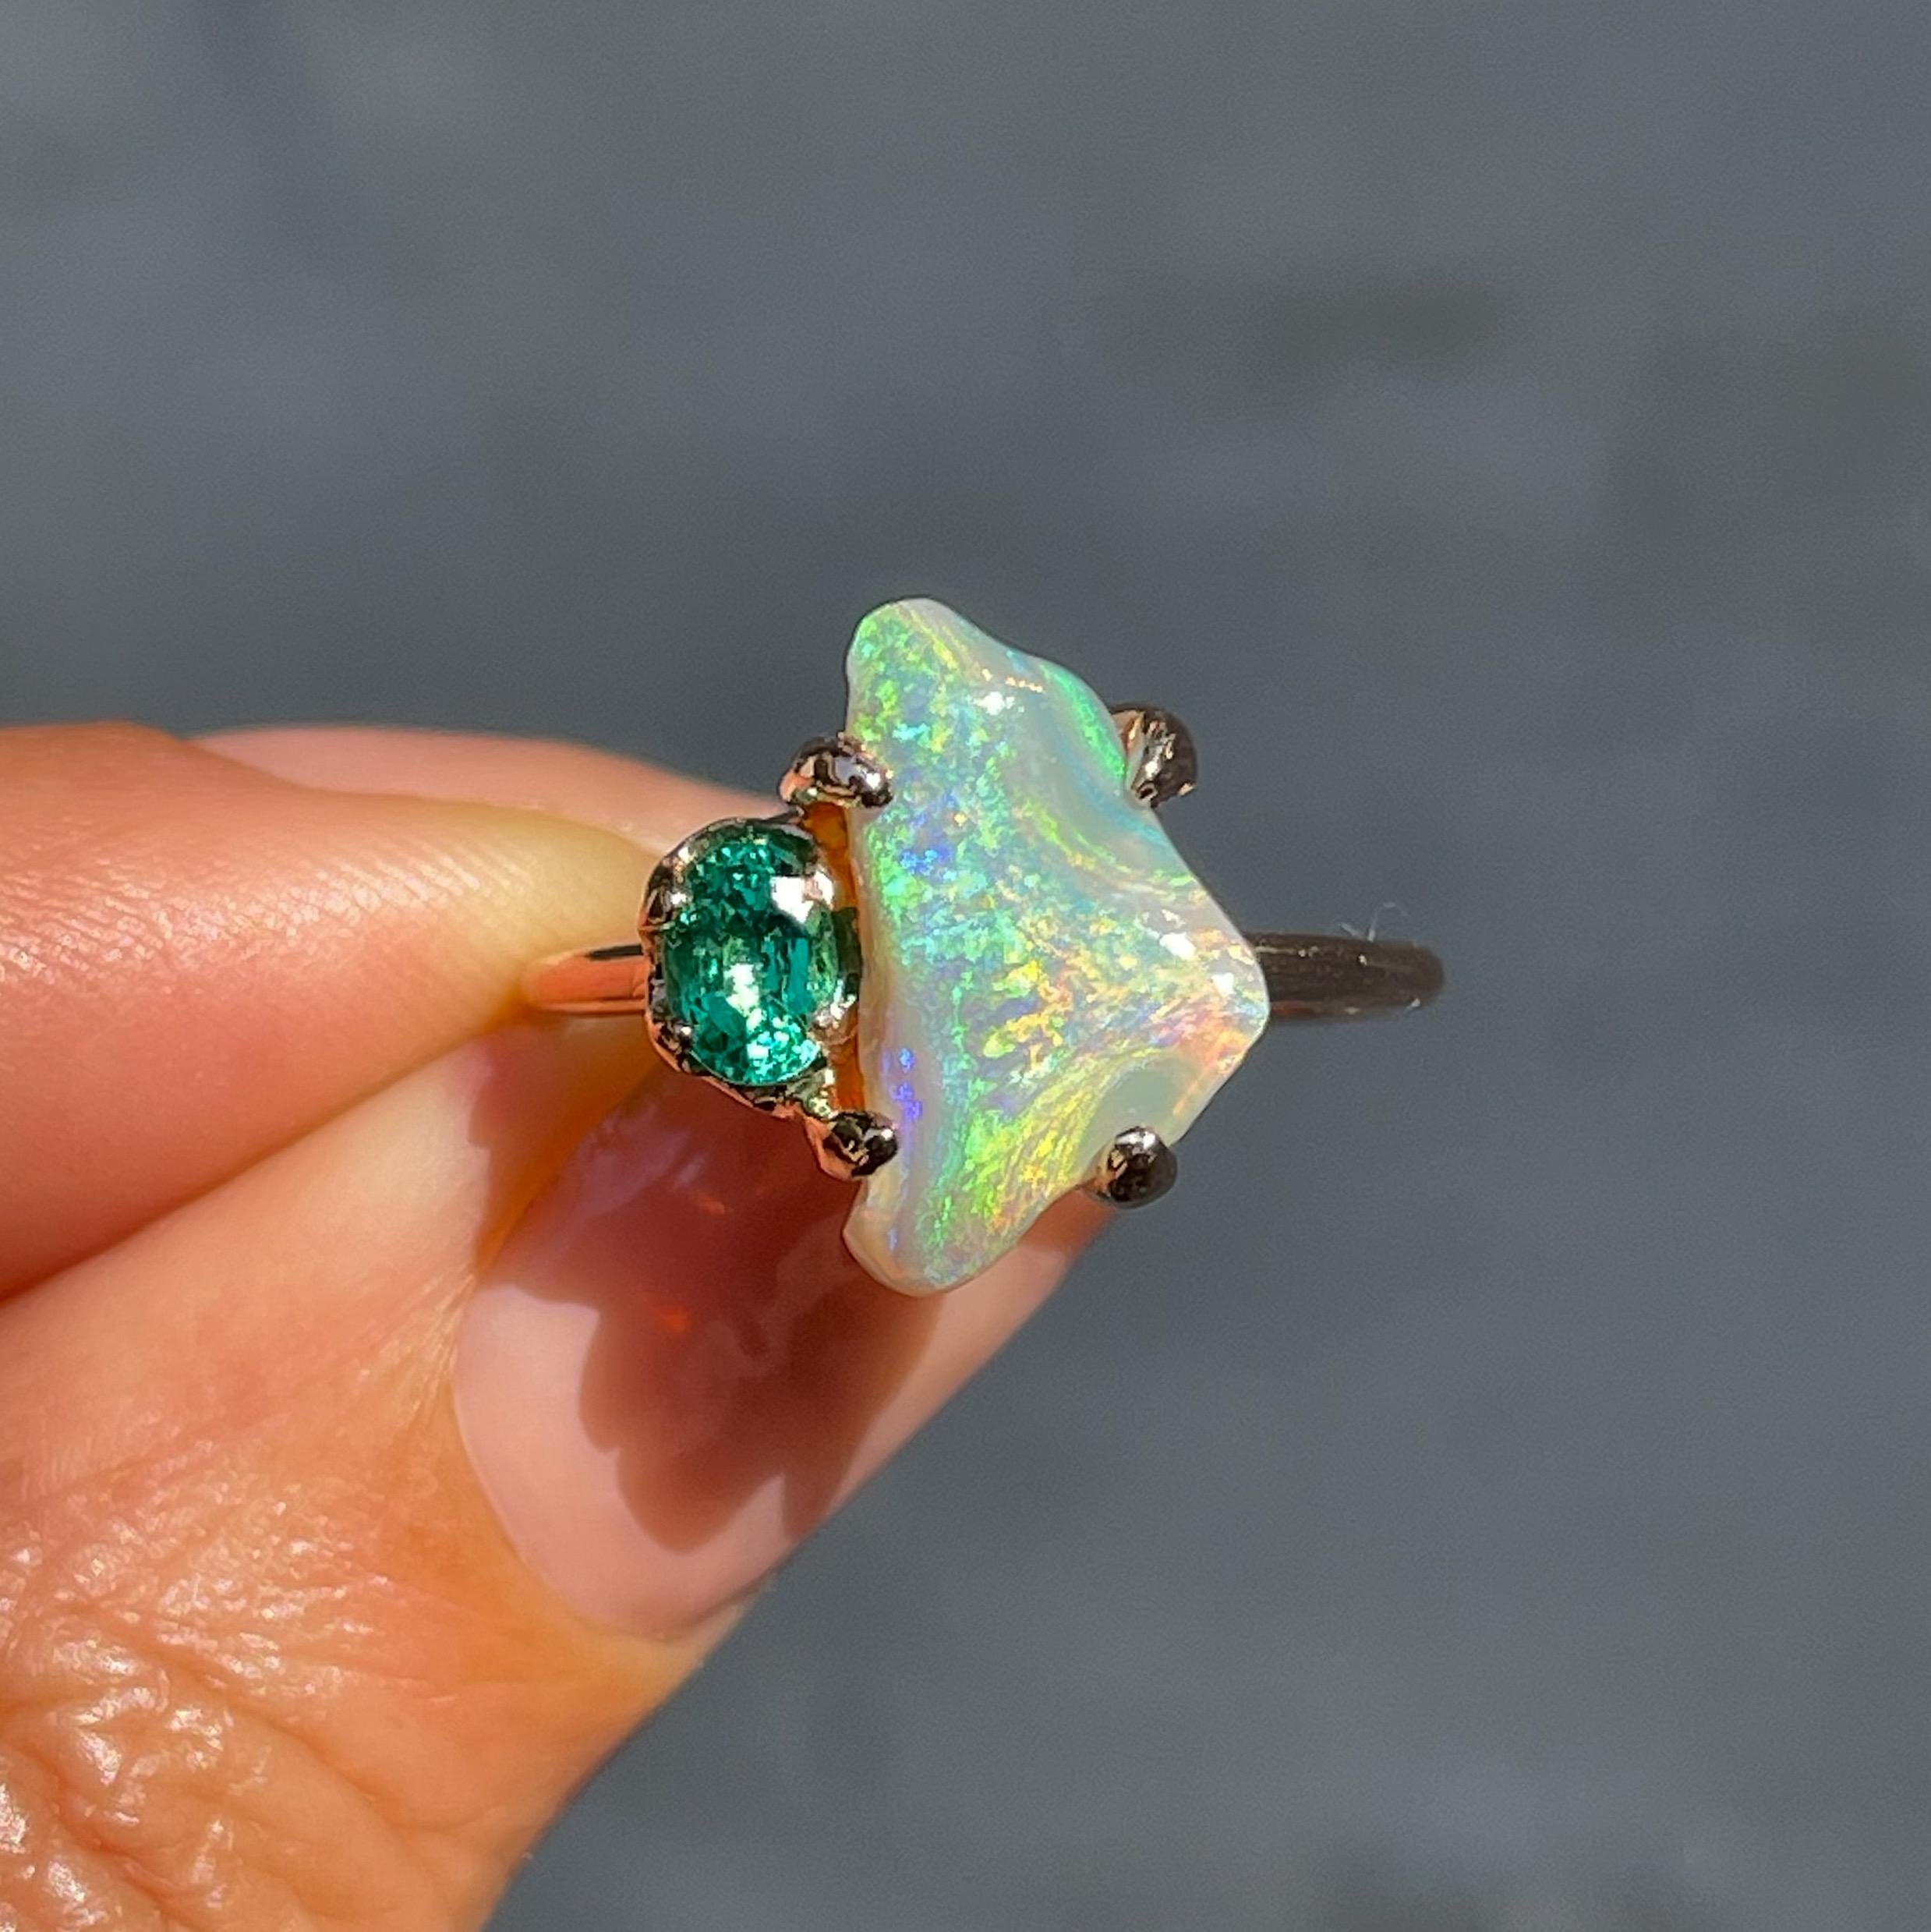 Through its supple display of florid color, a Black Opal makes a bold impression in this opal and emerald ring. Set in rose gold with an oval emerald, the Lightning Ridge Opal exudes an ethos of renewal. The chromatic flow pours forth from the apex